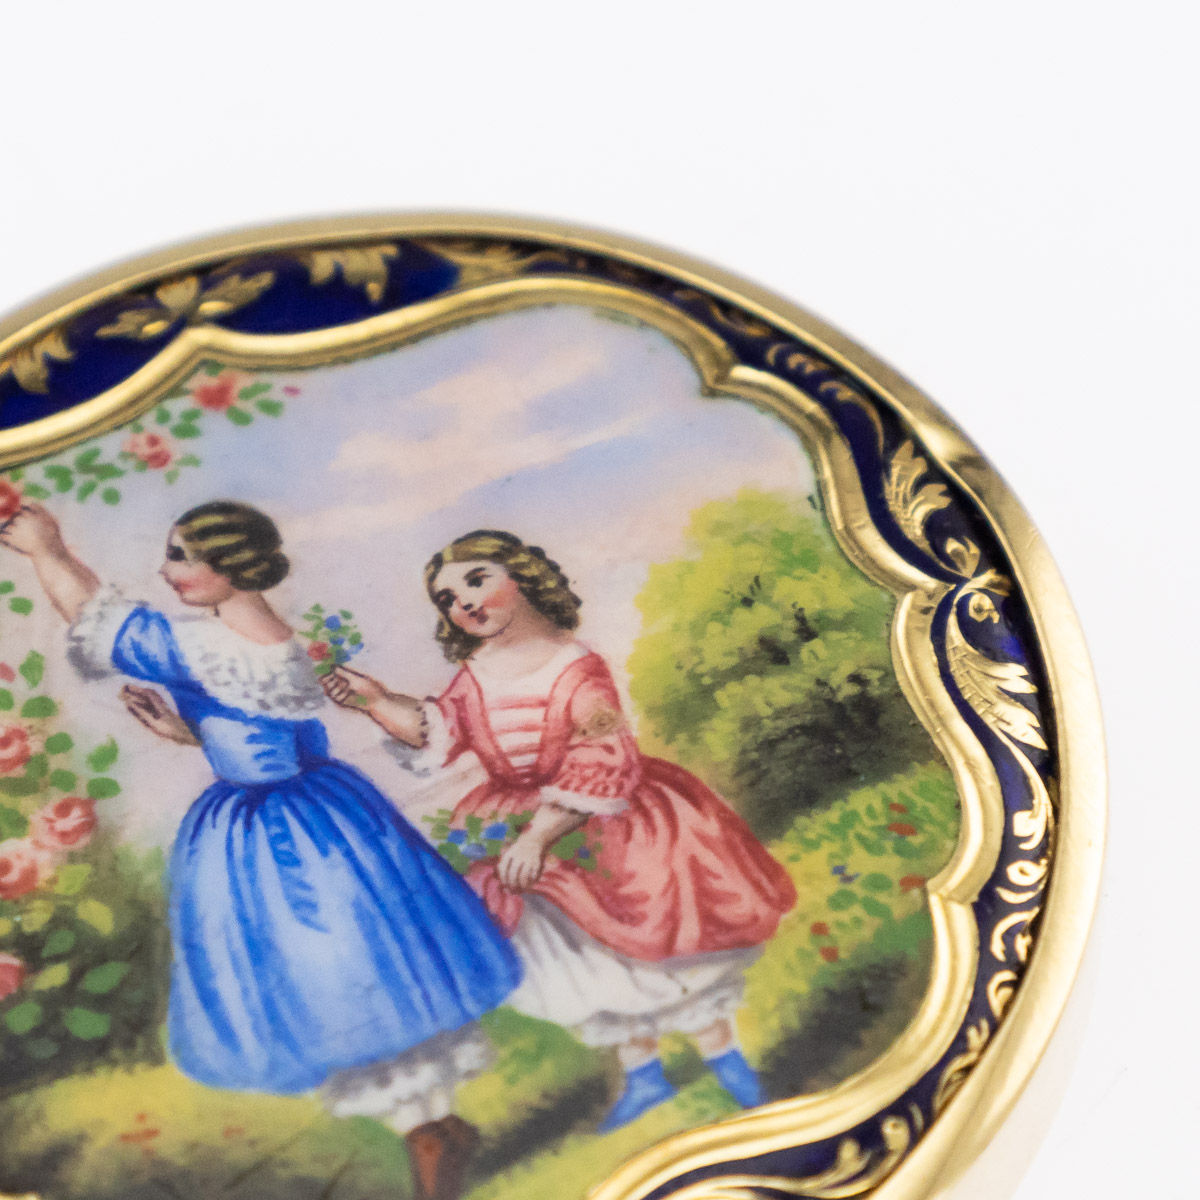 AN EARLY 20TH CENTURY 14CT GOLD AND ENAMEL PILL BOX, RUSSIAN, C.1900 - Image 7 of 8